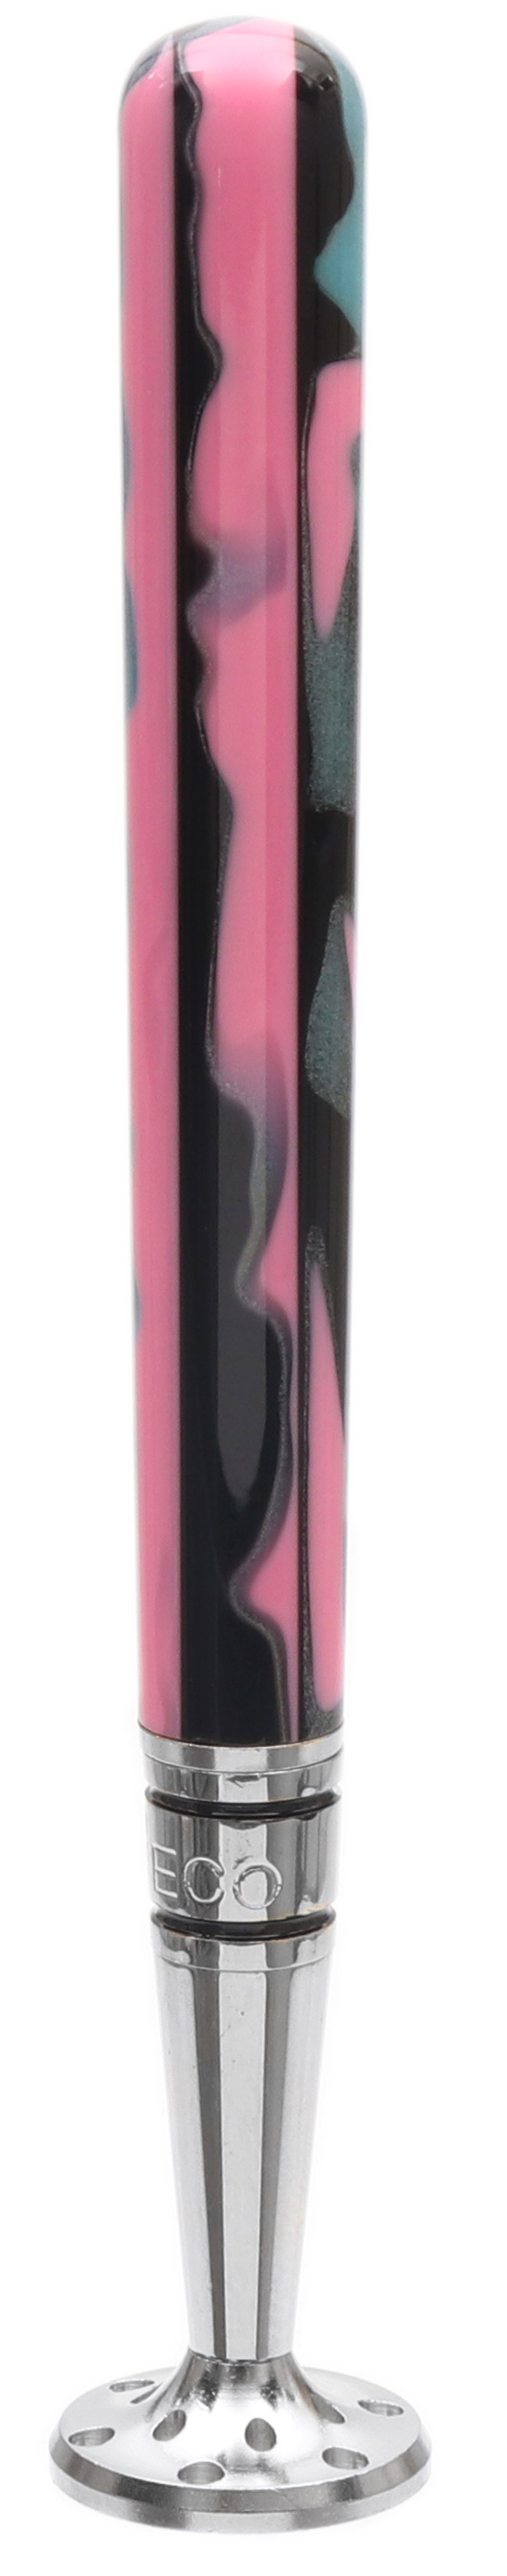 Pipe Tools & Supplies 8deco Club Tamper Pink and Black Swirl